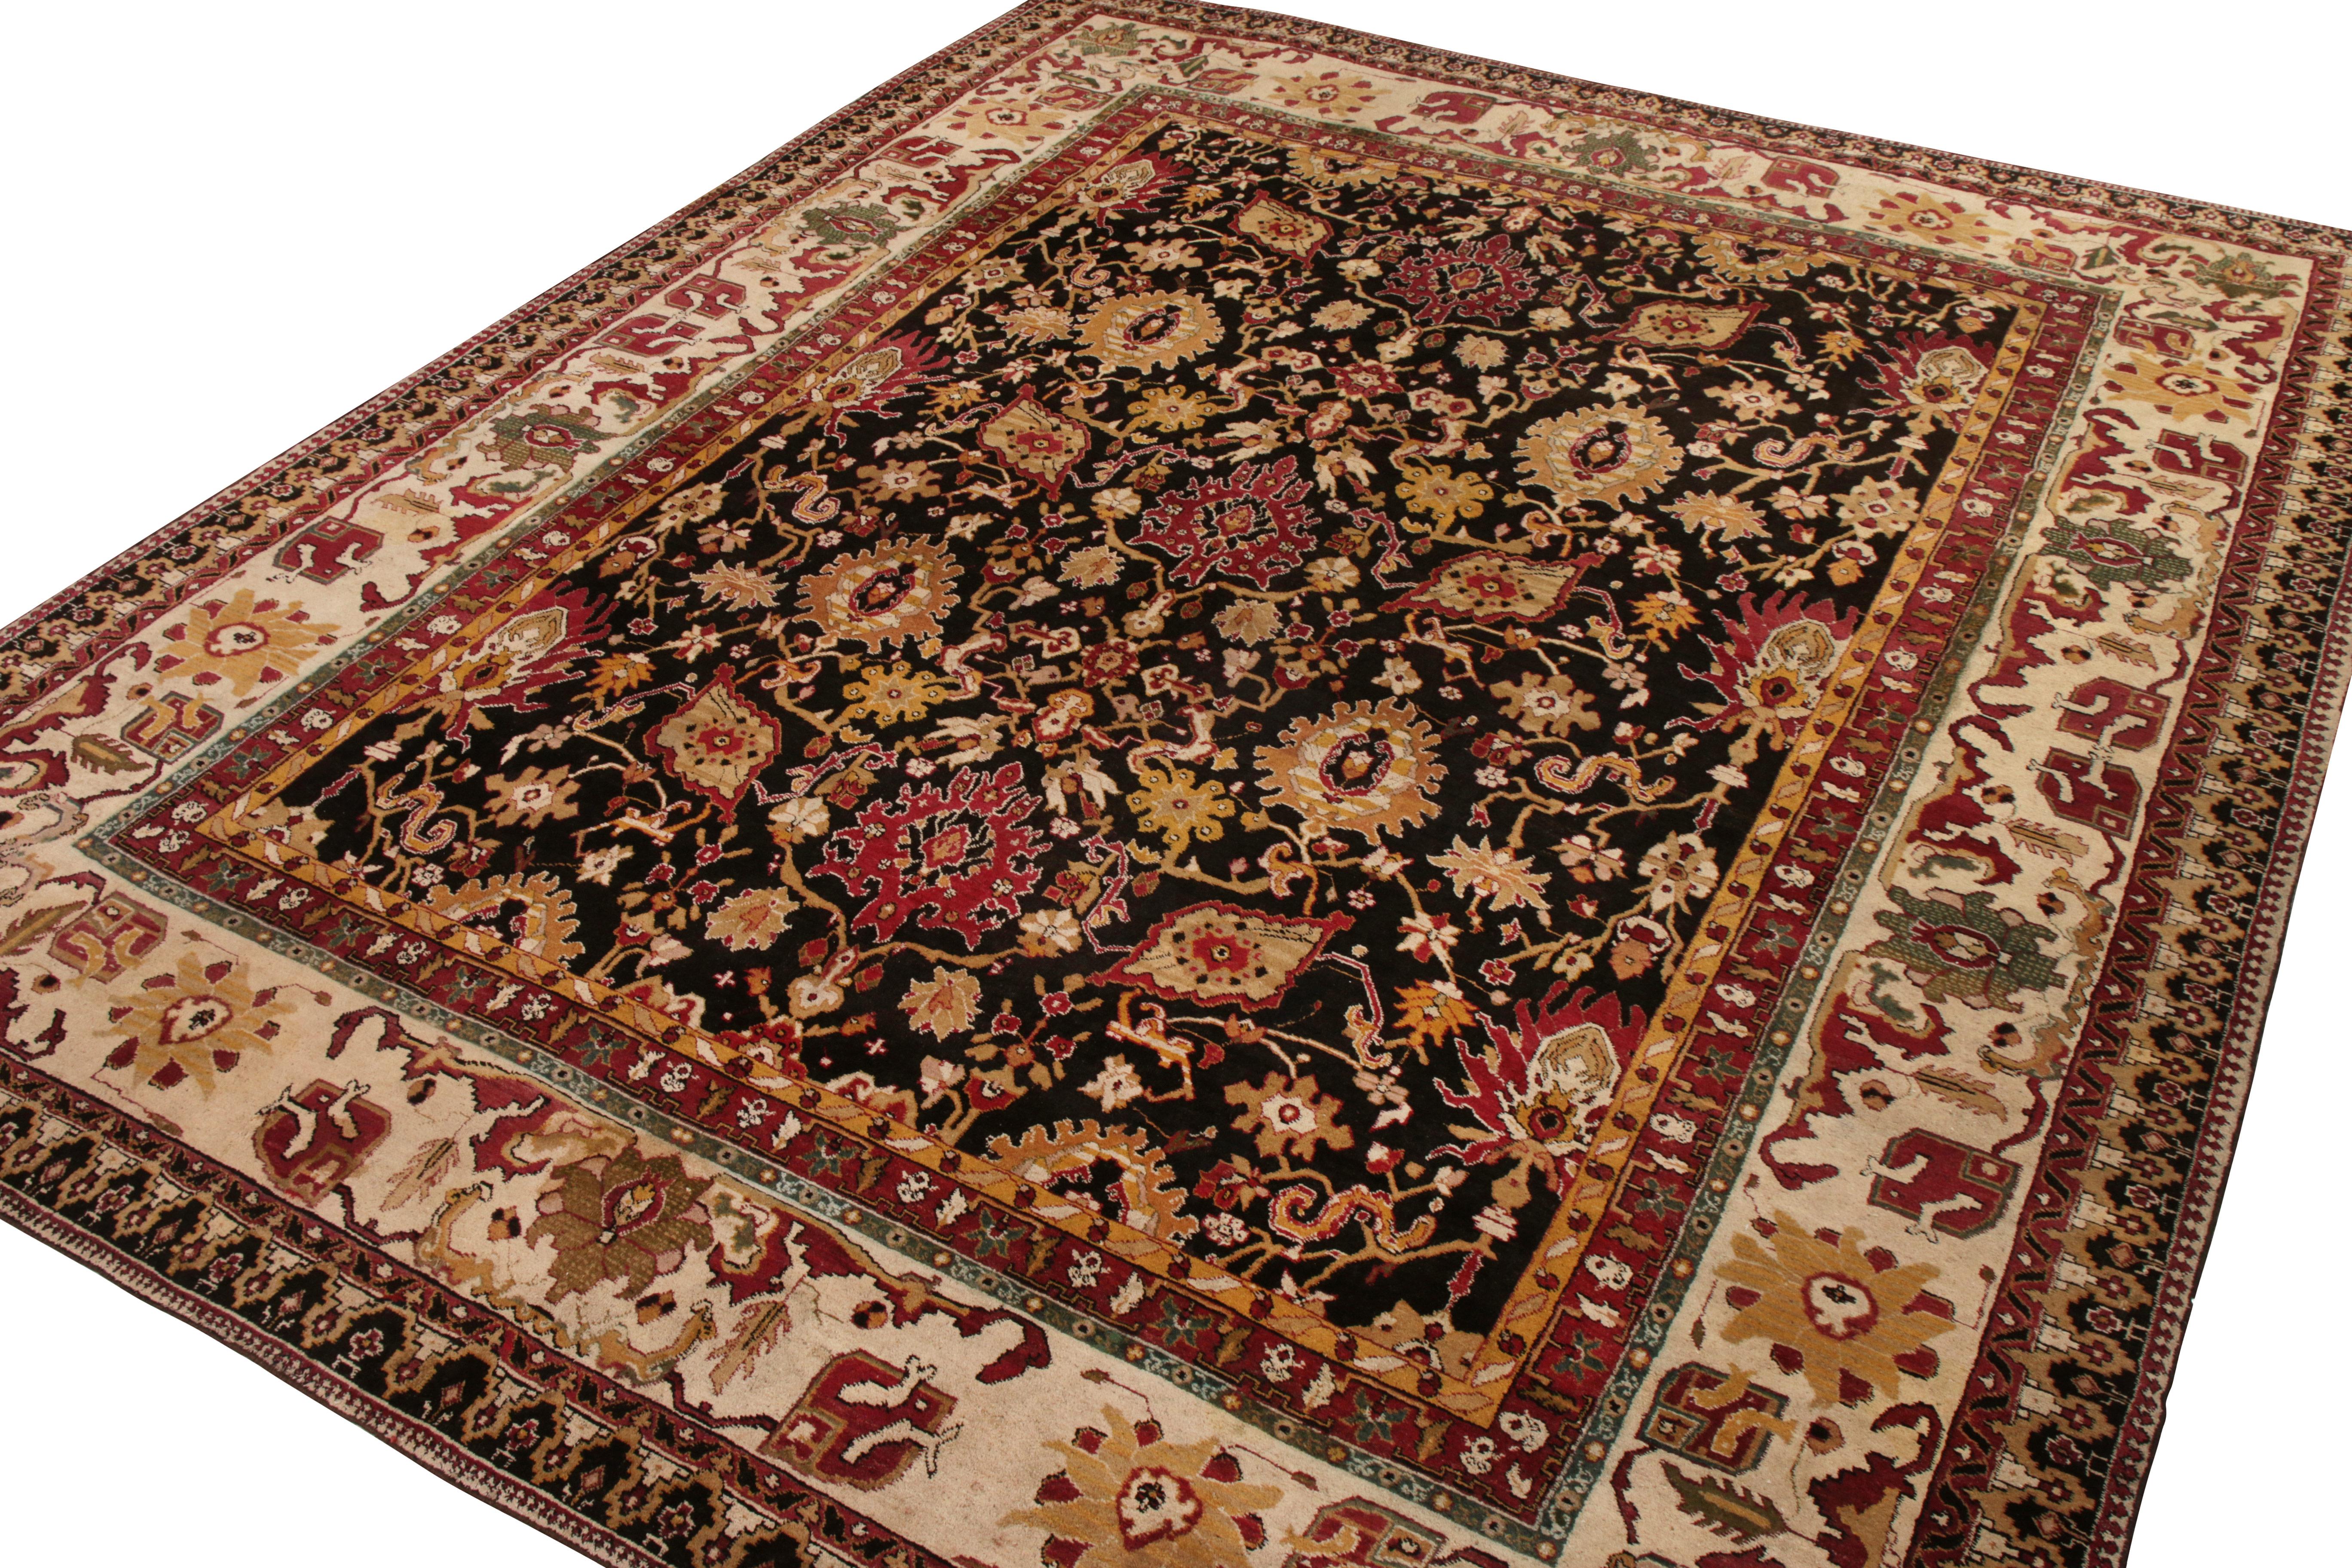 This antique 12x15 Agra rug is a rare oversized piece of its period—hand-knotted in wool circa 1920-1930.

On the Design:

This piece enjoys an all over floral pattern in warm red, gold and beige-brown against a near-black field. Keen eyes and